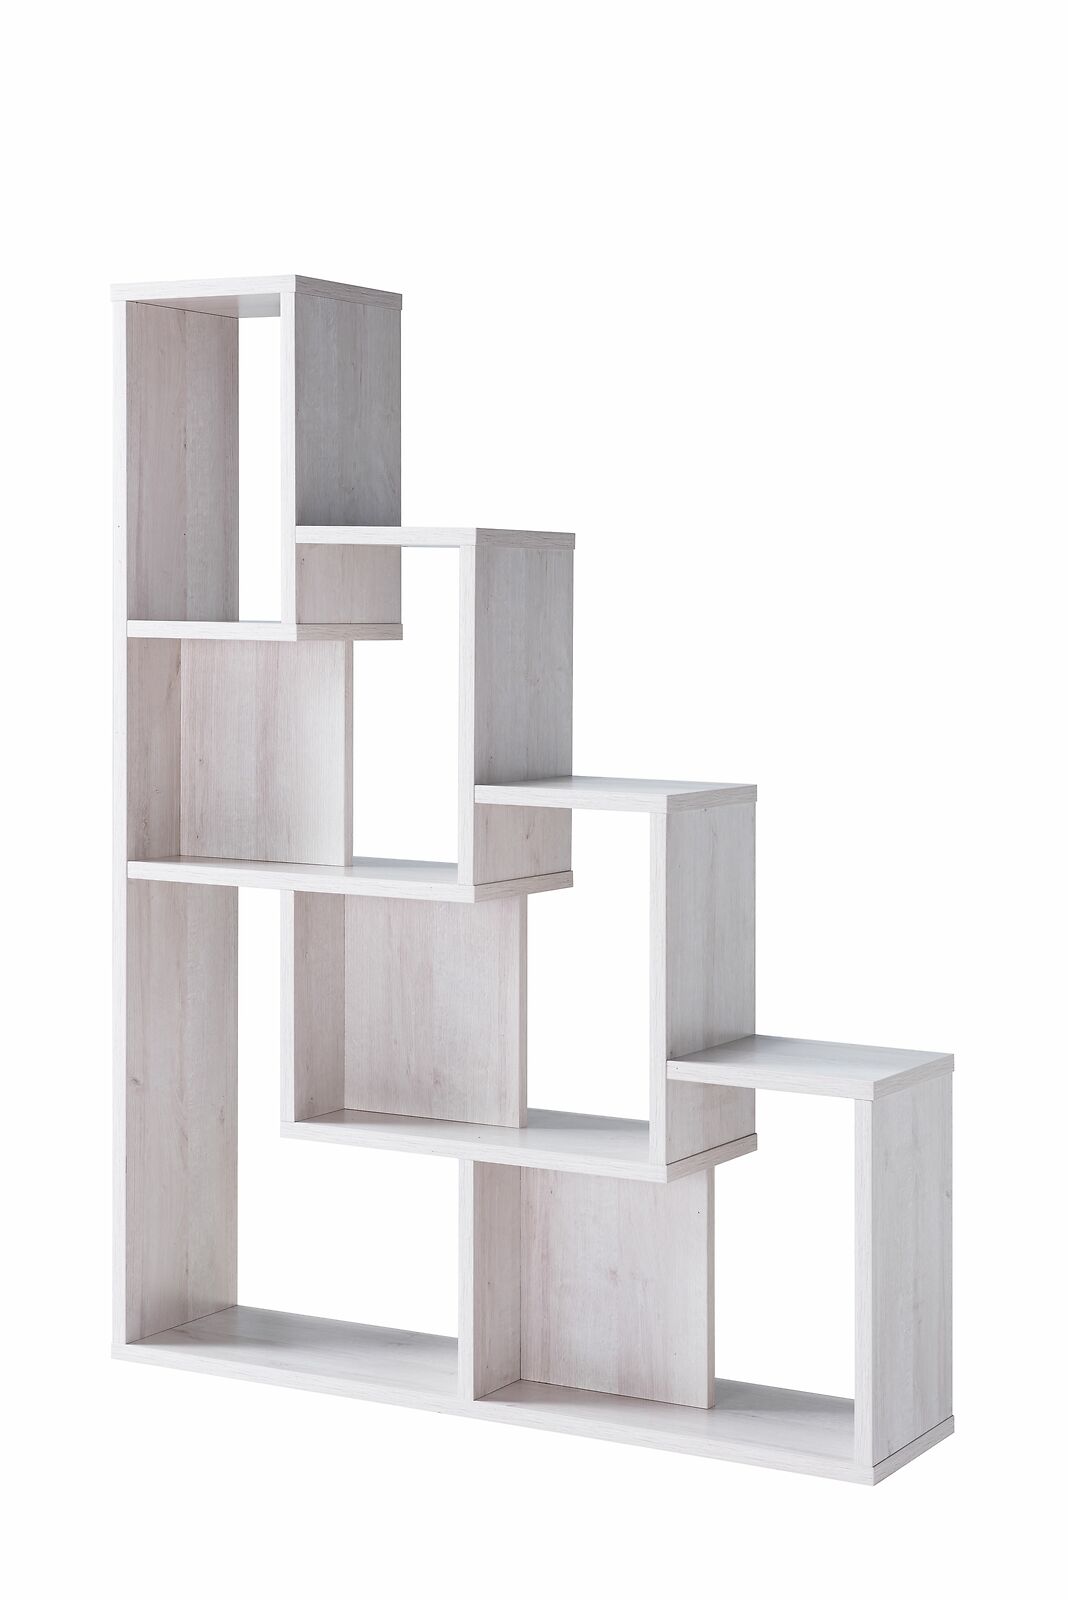 Contemporary Home Office Cube Bookcase Display Shelves in White Oak